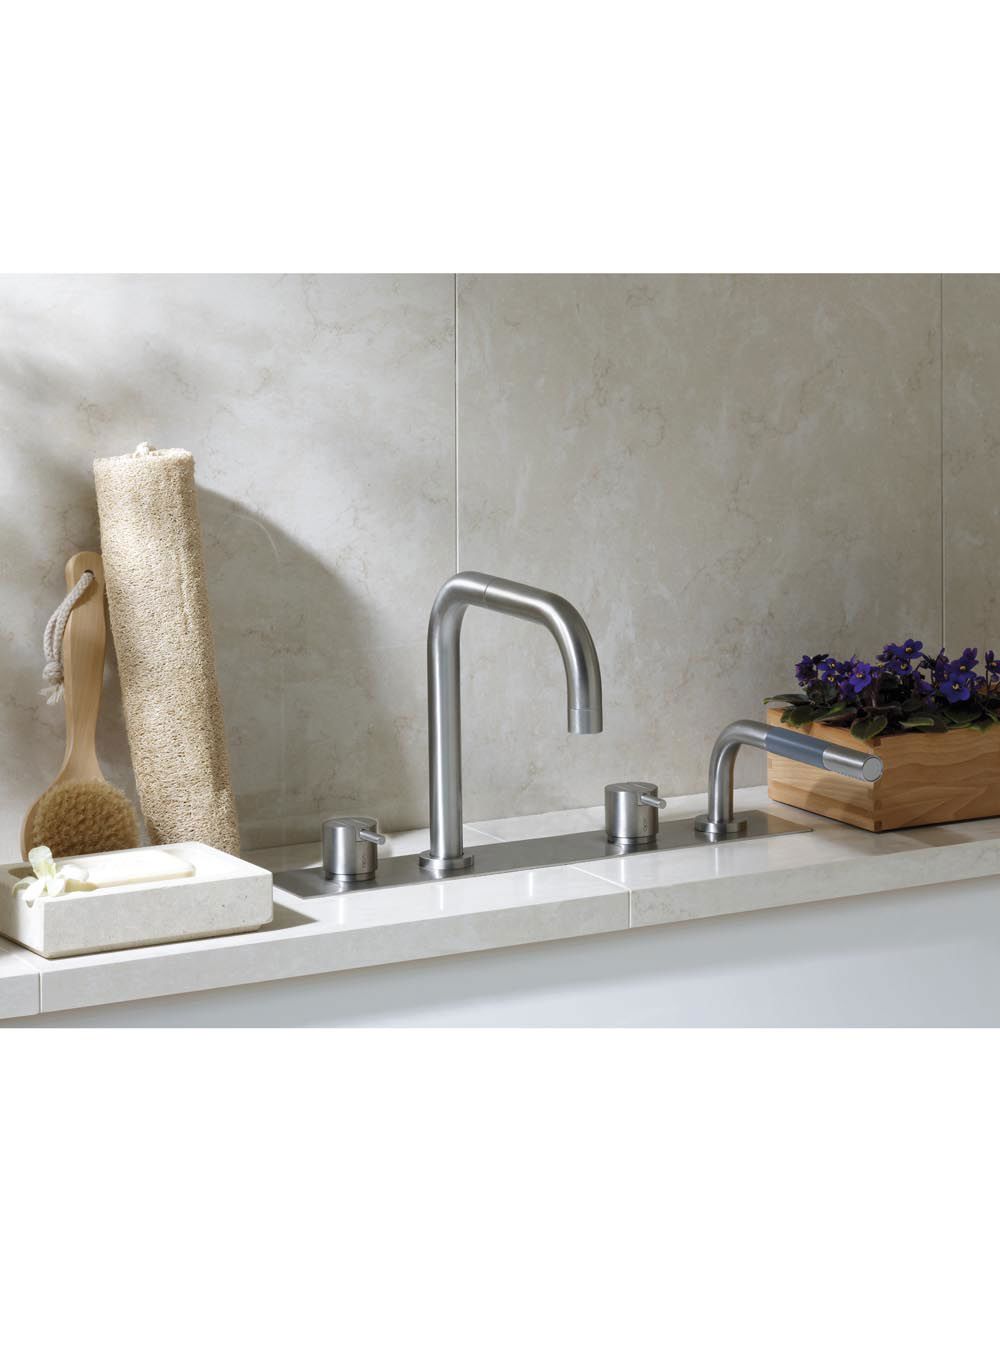 BK10: One-handle mixer with double swivel spout for bath filling and mixer with hand shower. Complete with